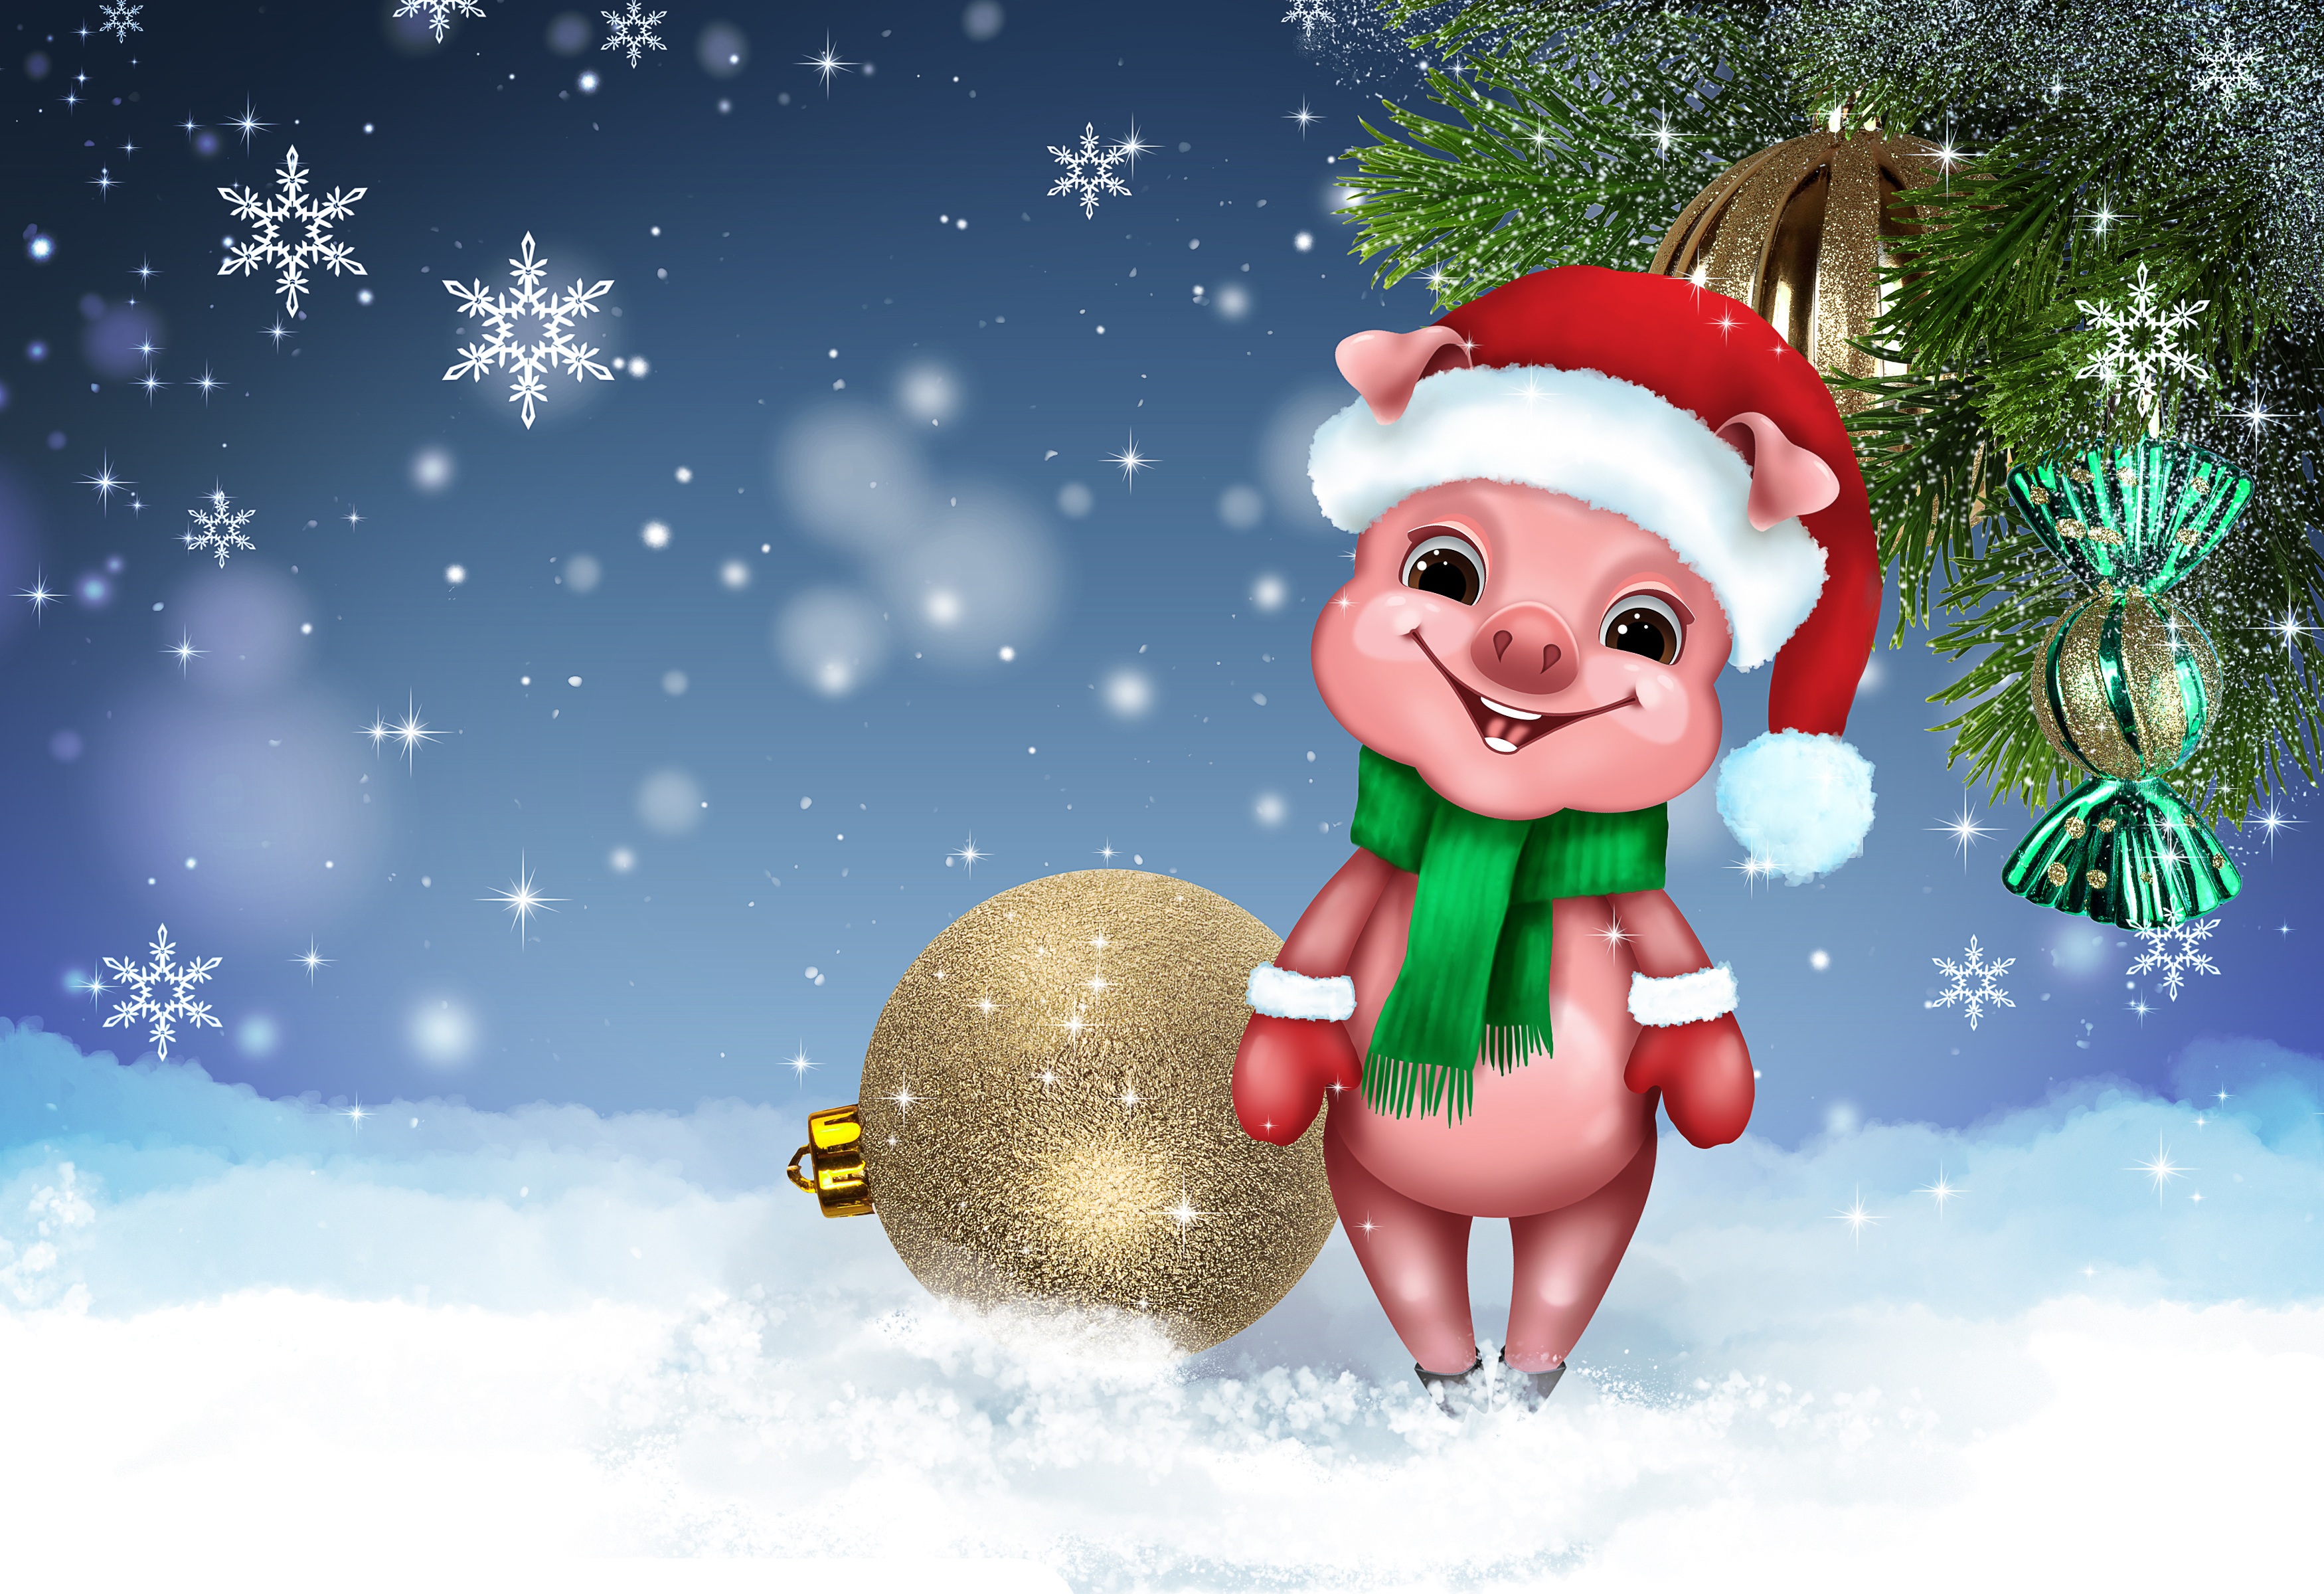 Wallpapers the pig is the symbol of the year Christmas background on the desktop